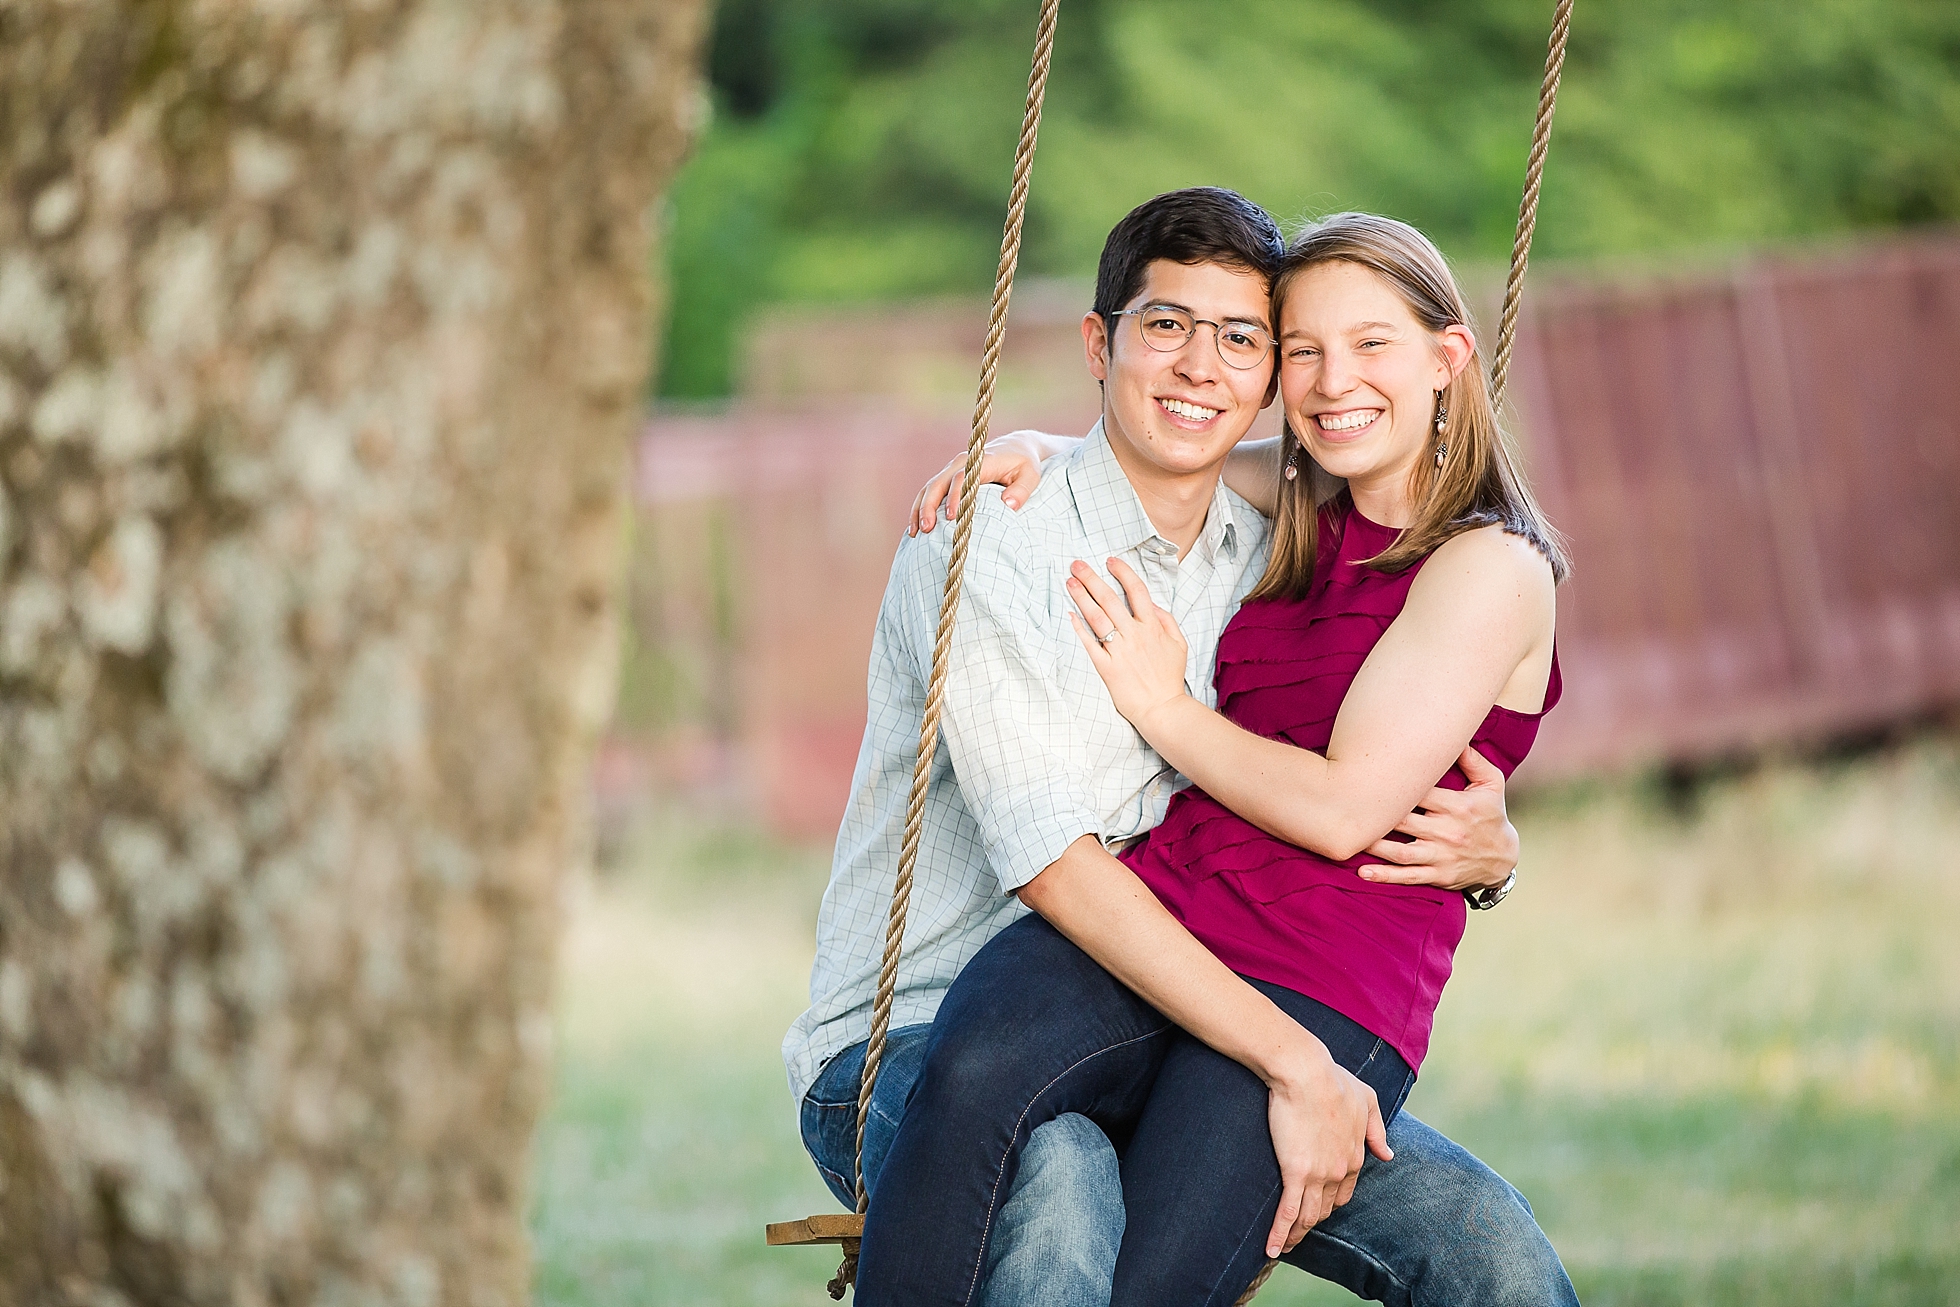 rope swing engagement photos